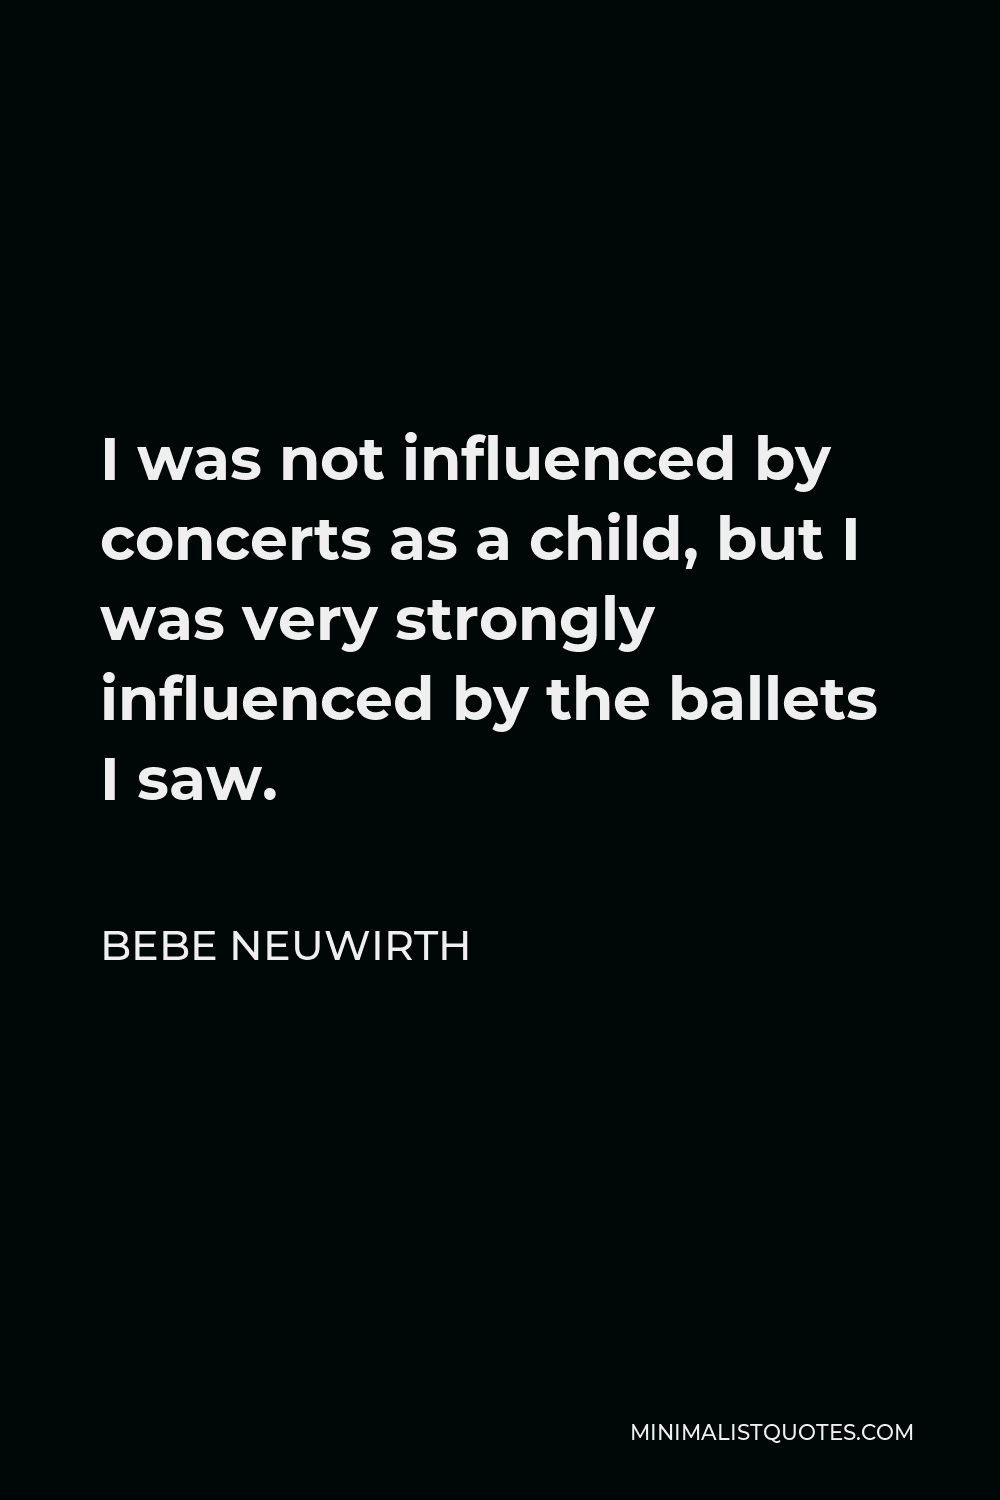 Bebe Neuwirth Quote - I was not influenced by concerts as a child, but I was very strongly influenced by the ballets I saw.